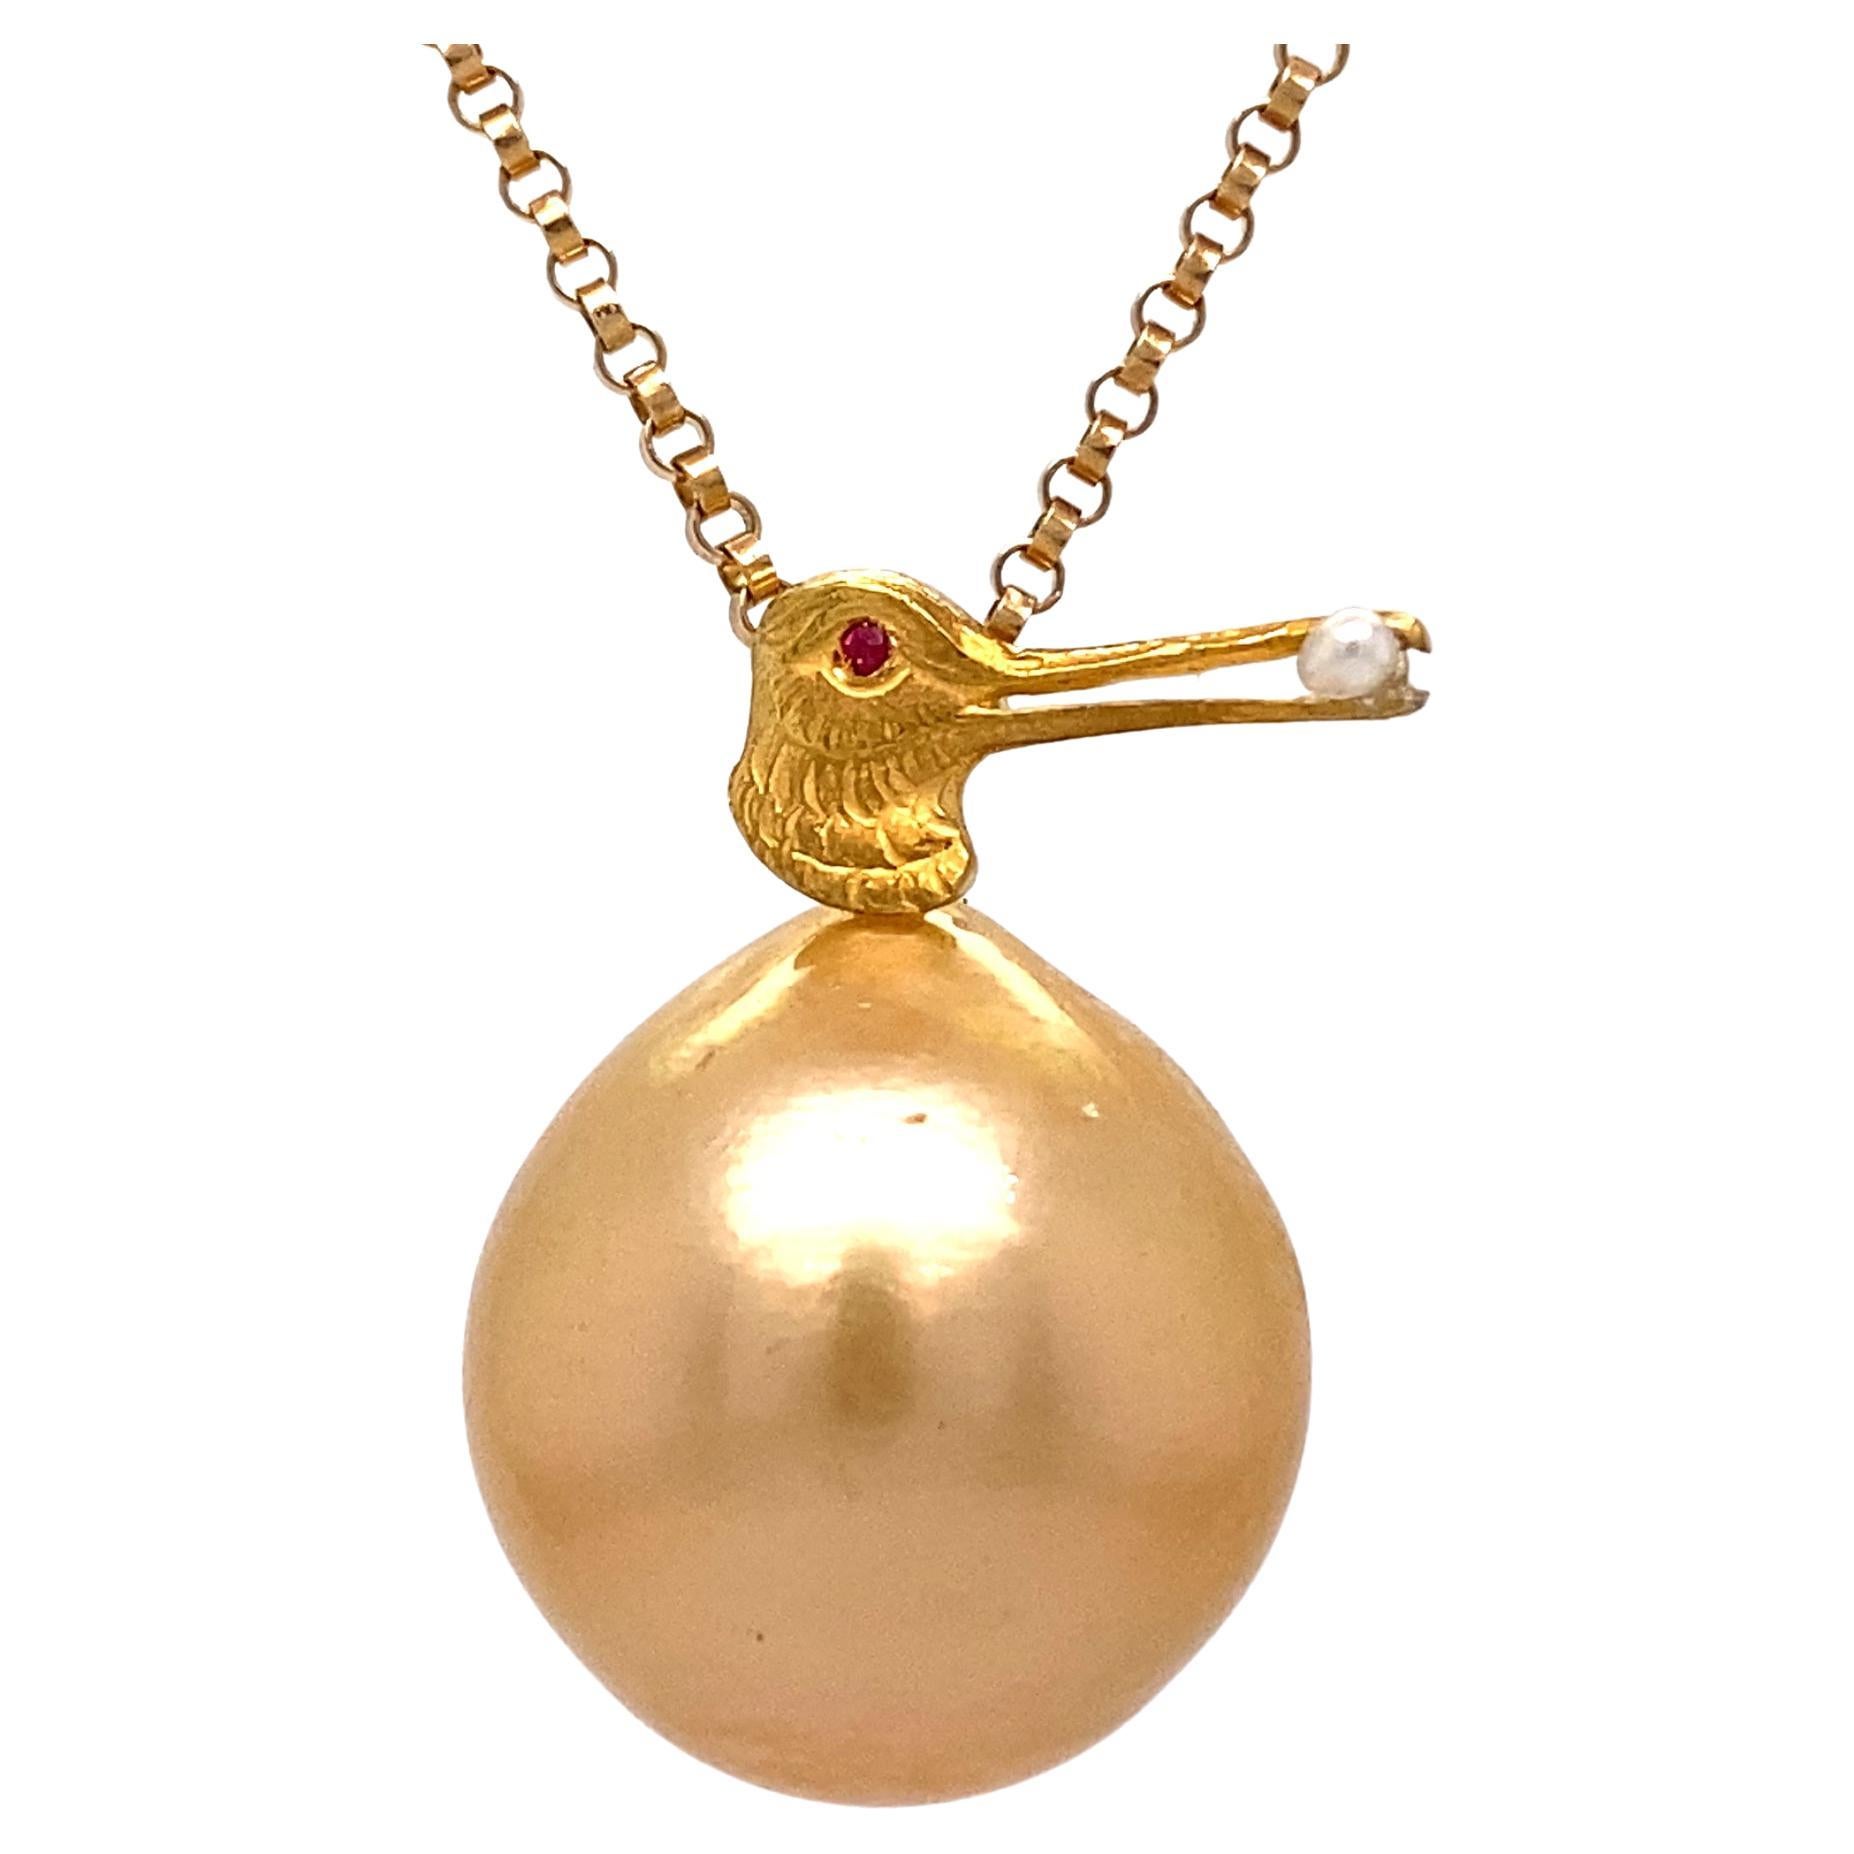 "Goldie" South Sea Pearl Pendant with Ruby-Eyed Shorebird on Chain